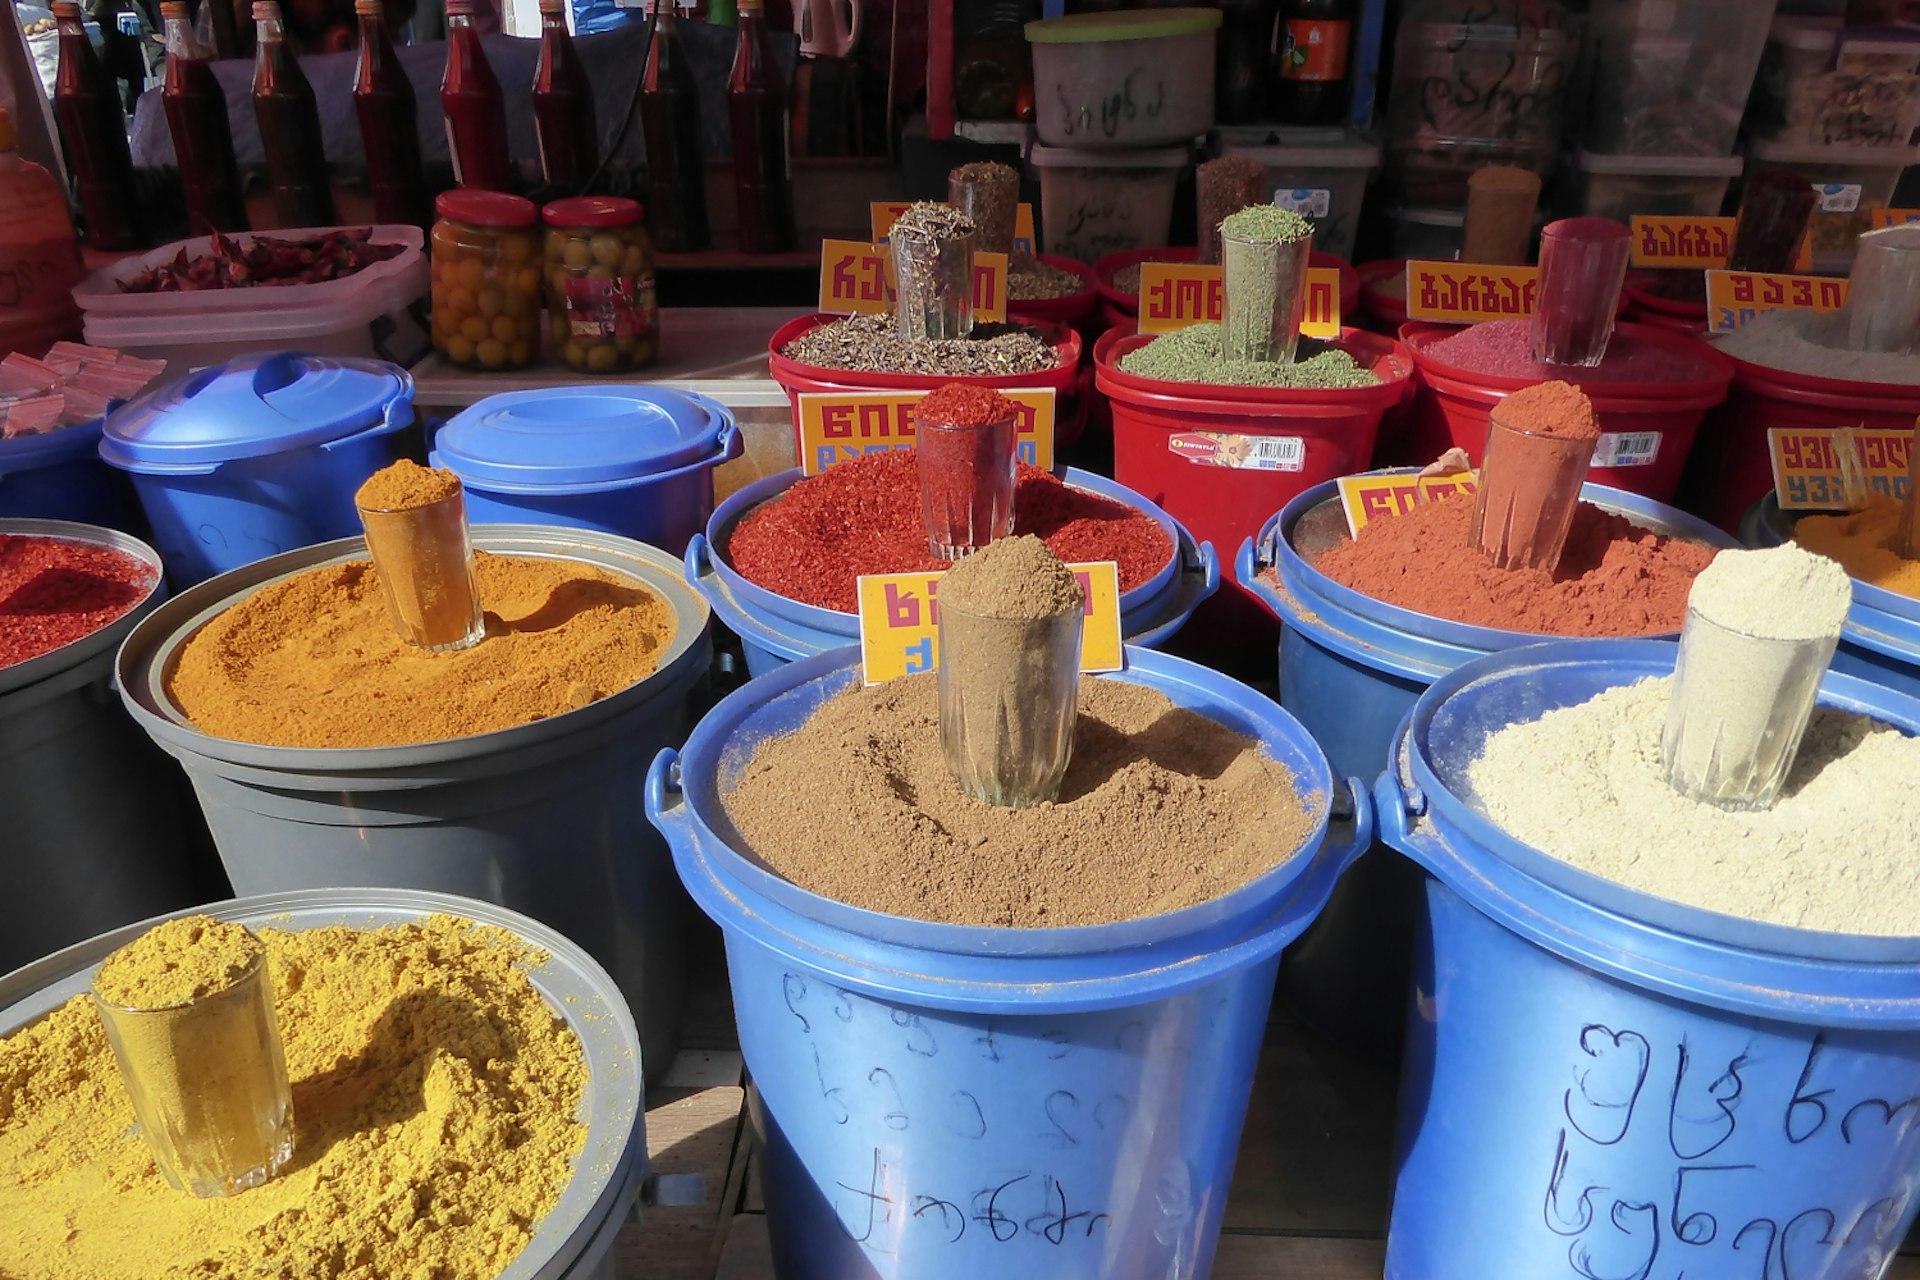 Many large colourful buckets are filled to the brim with different spices of red, brown, beige and yellow